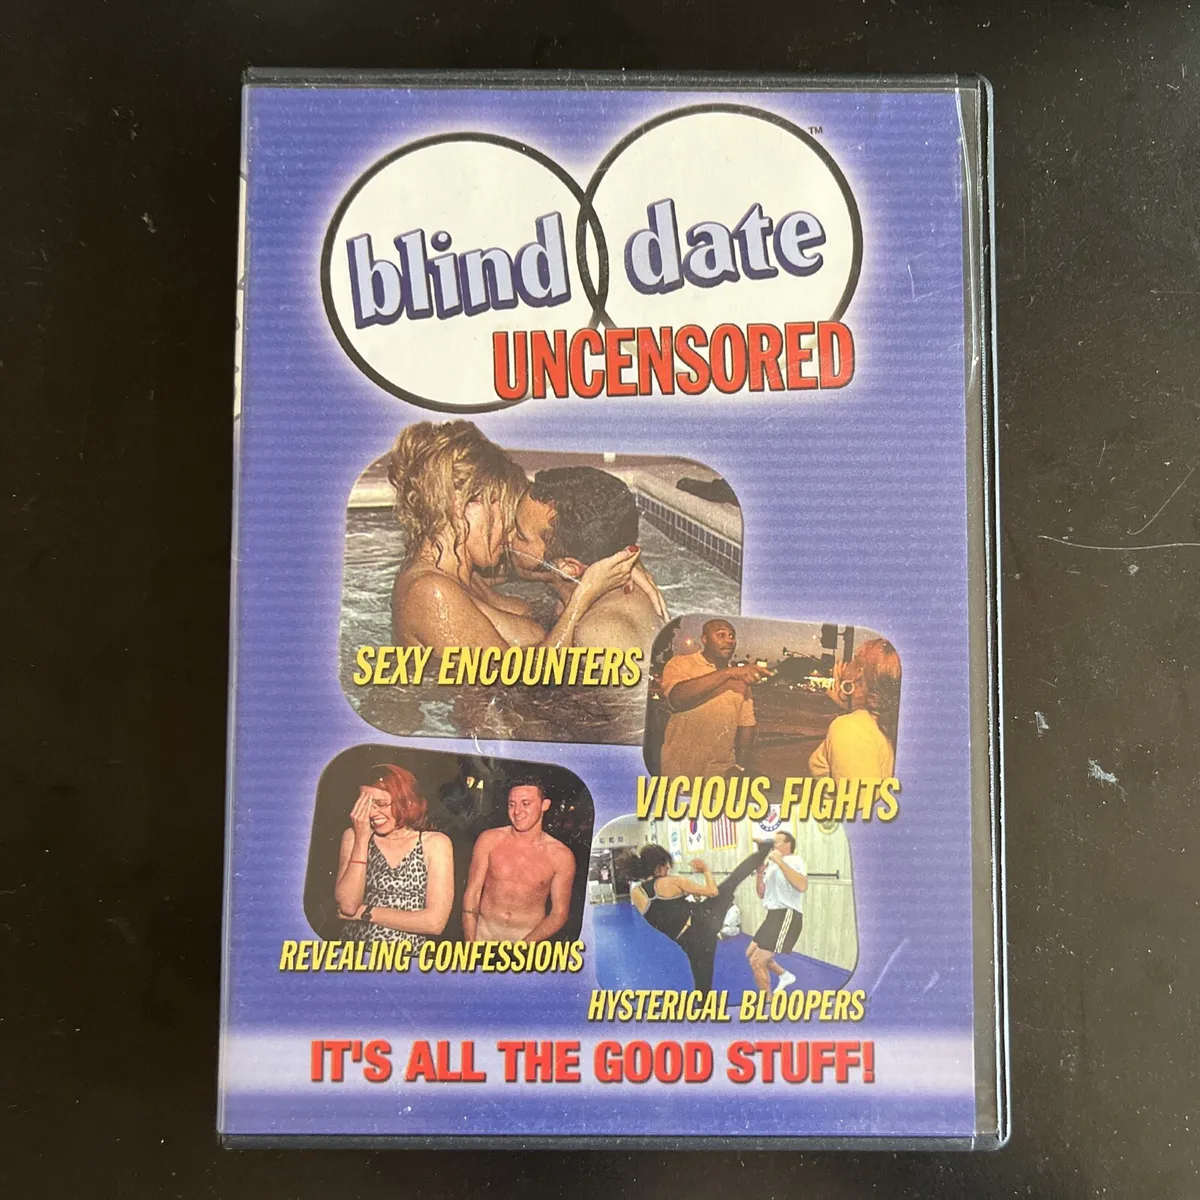 bobbie mcclure recommends Blind Date Show Uncensored